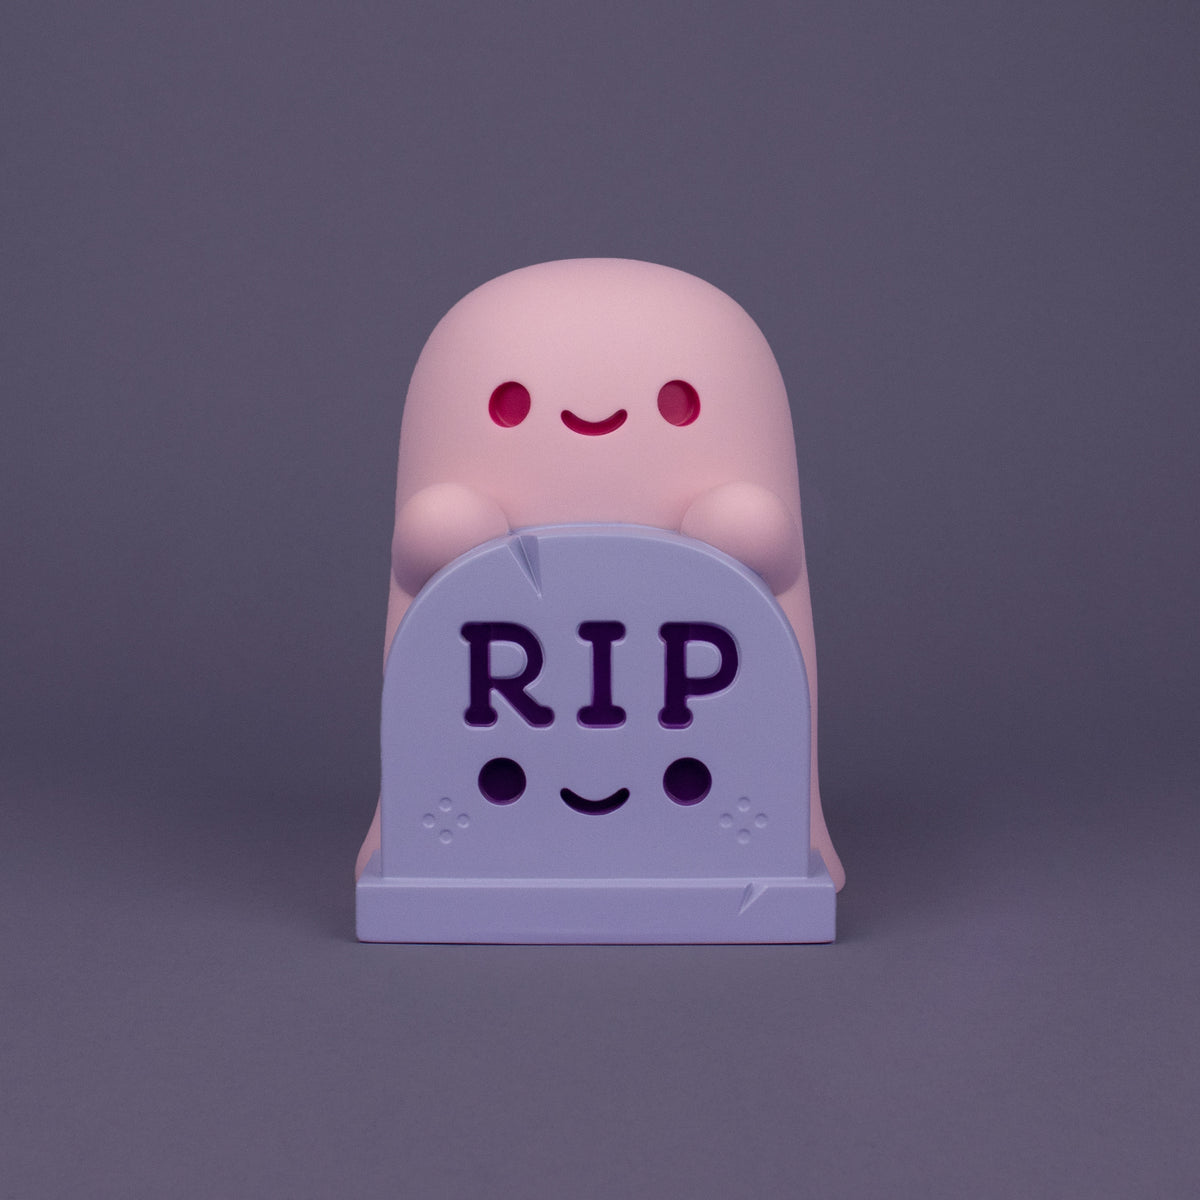 Lil Ghosty Night Light - Limited Edition Pink